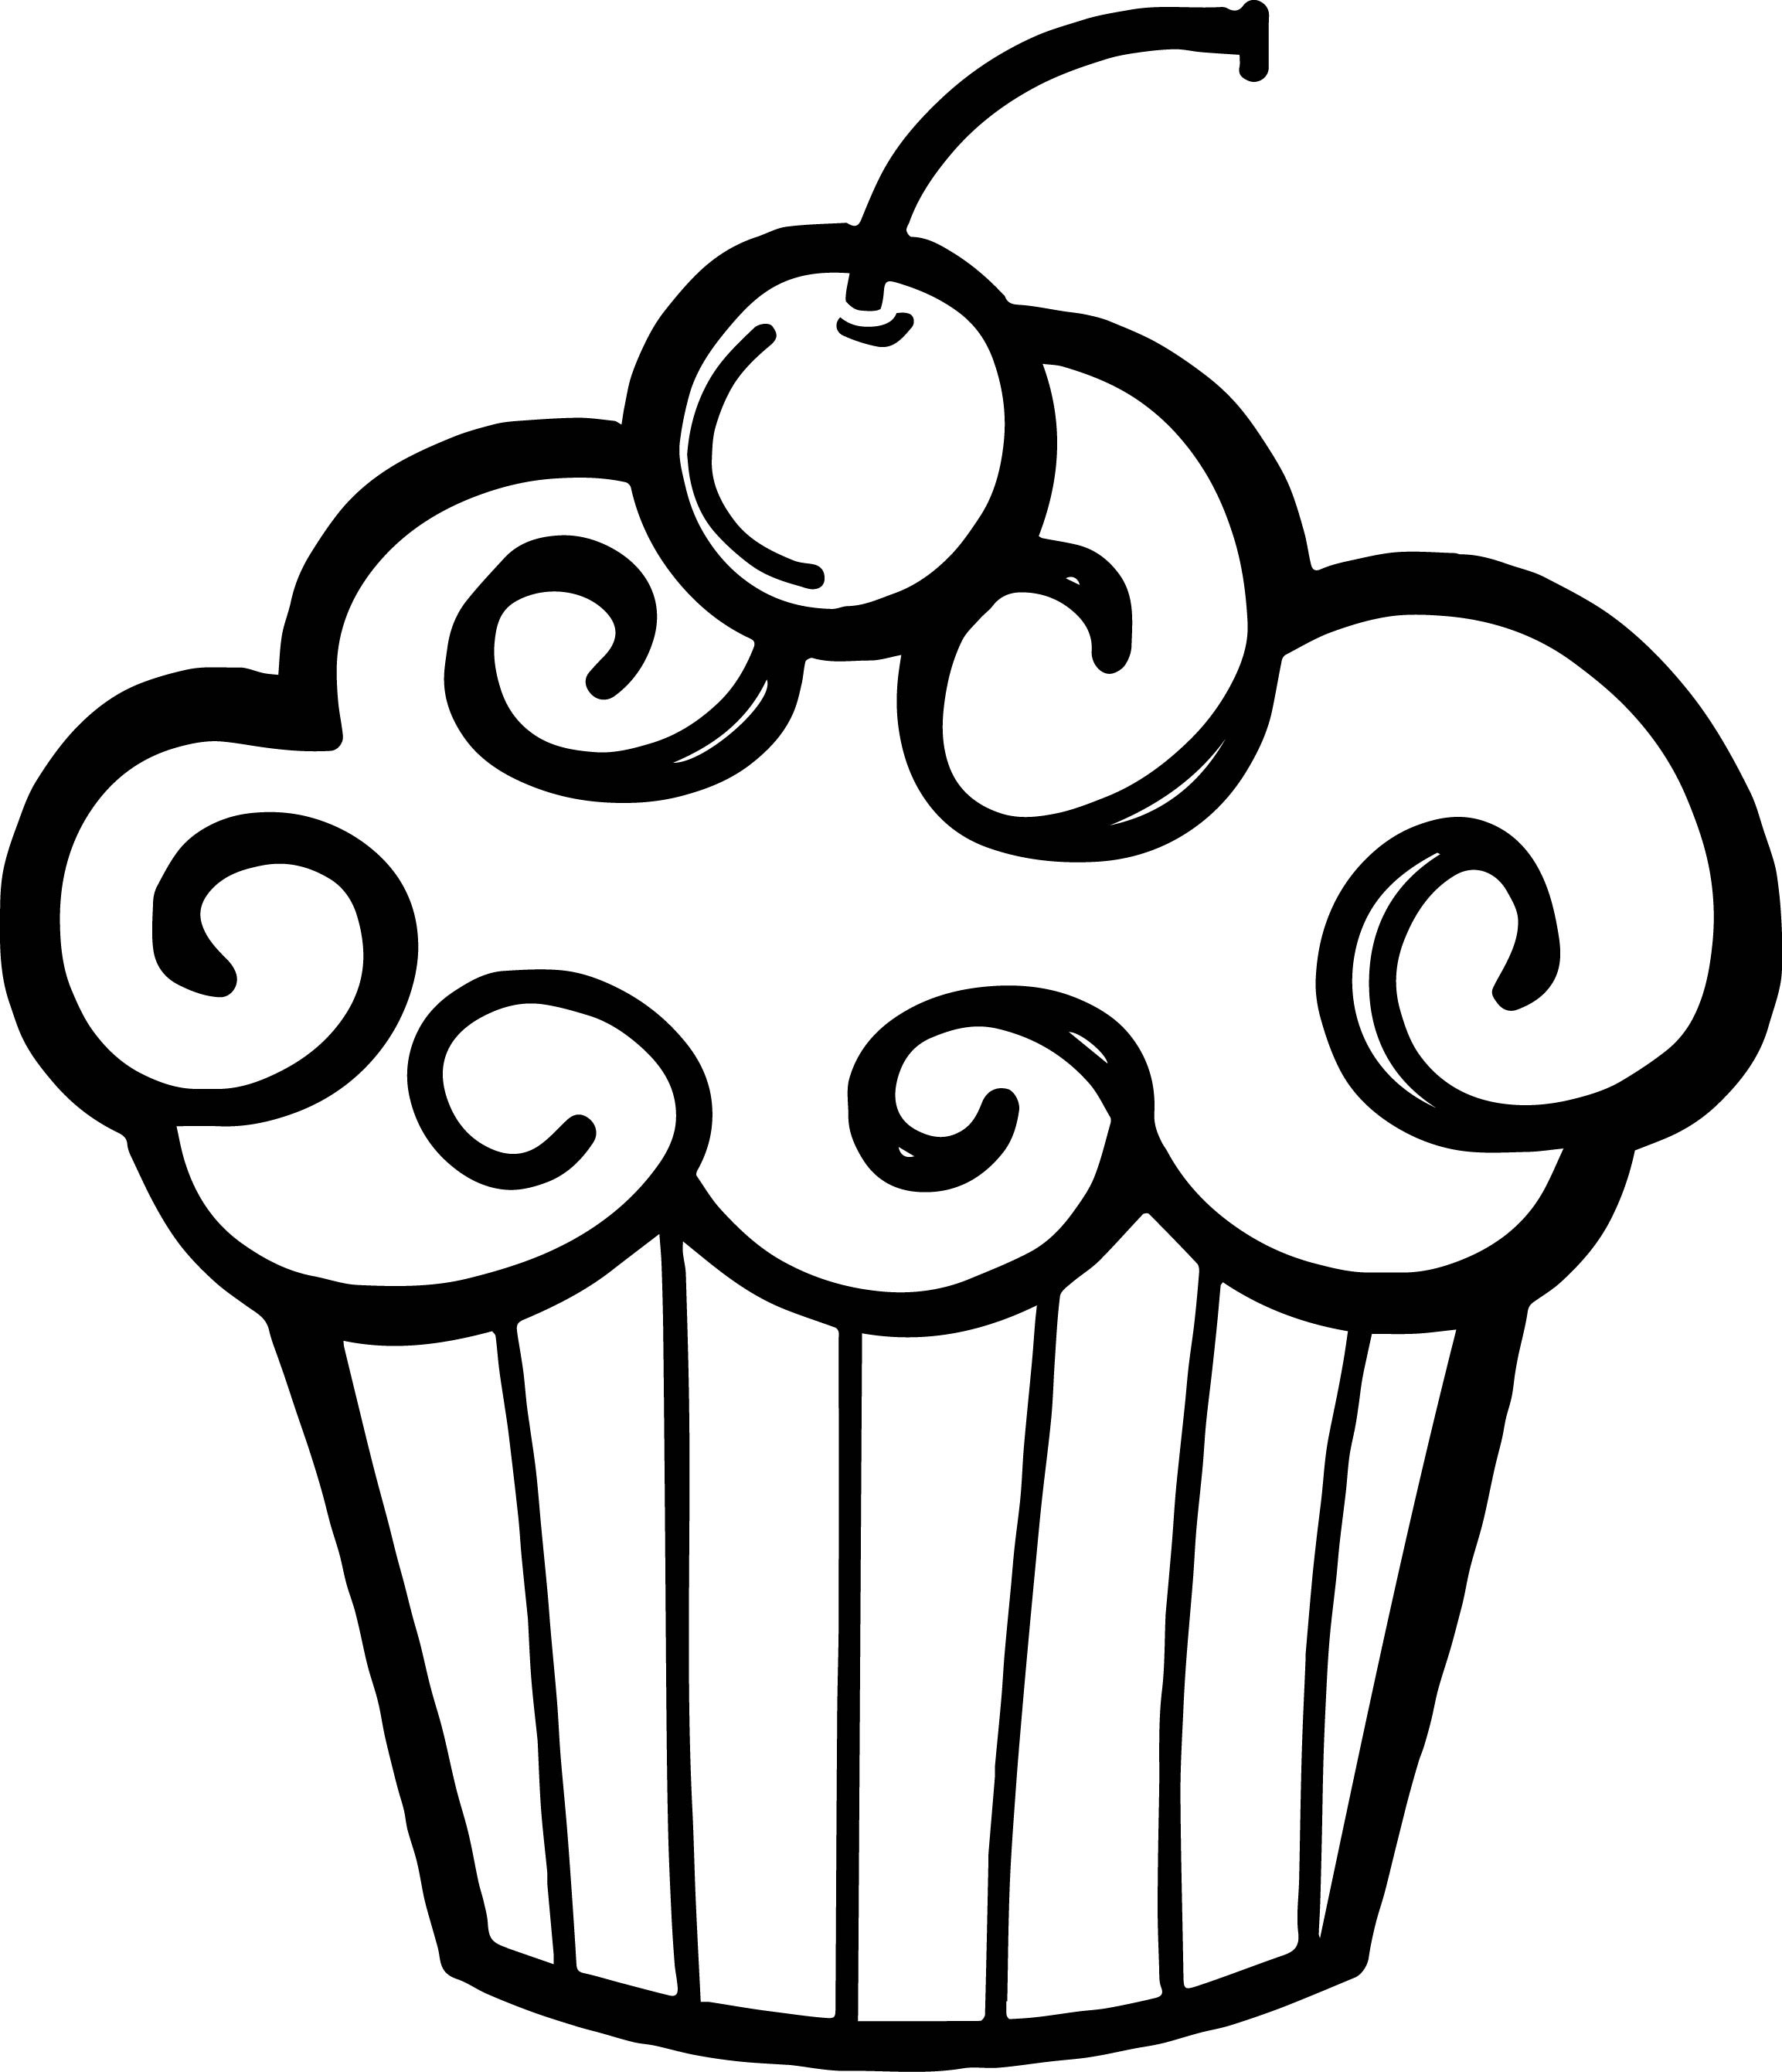 Cake Clipart Black And White
 Cupcake Outline Clip Art ClipArt Best